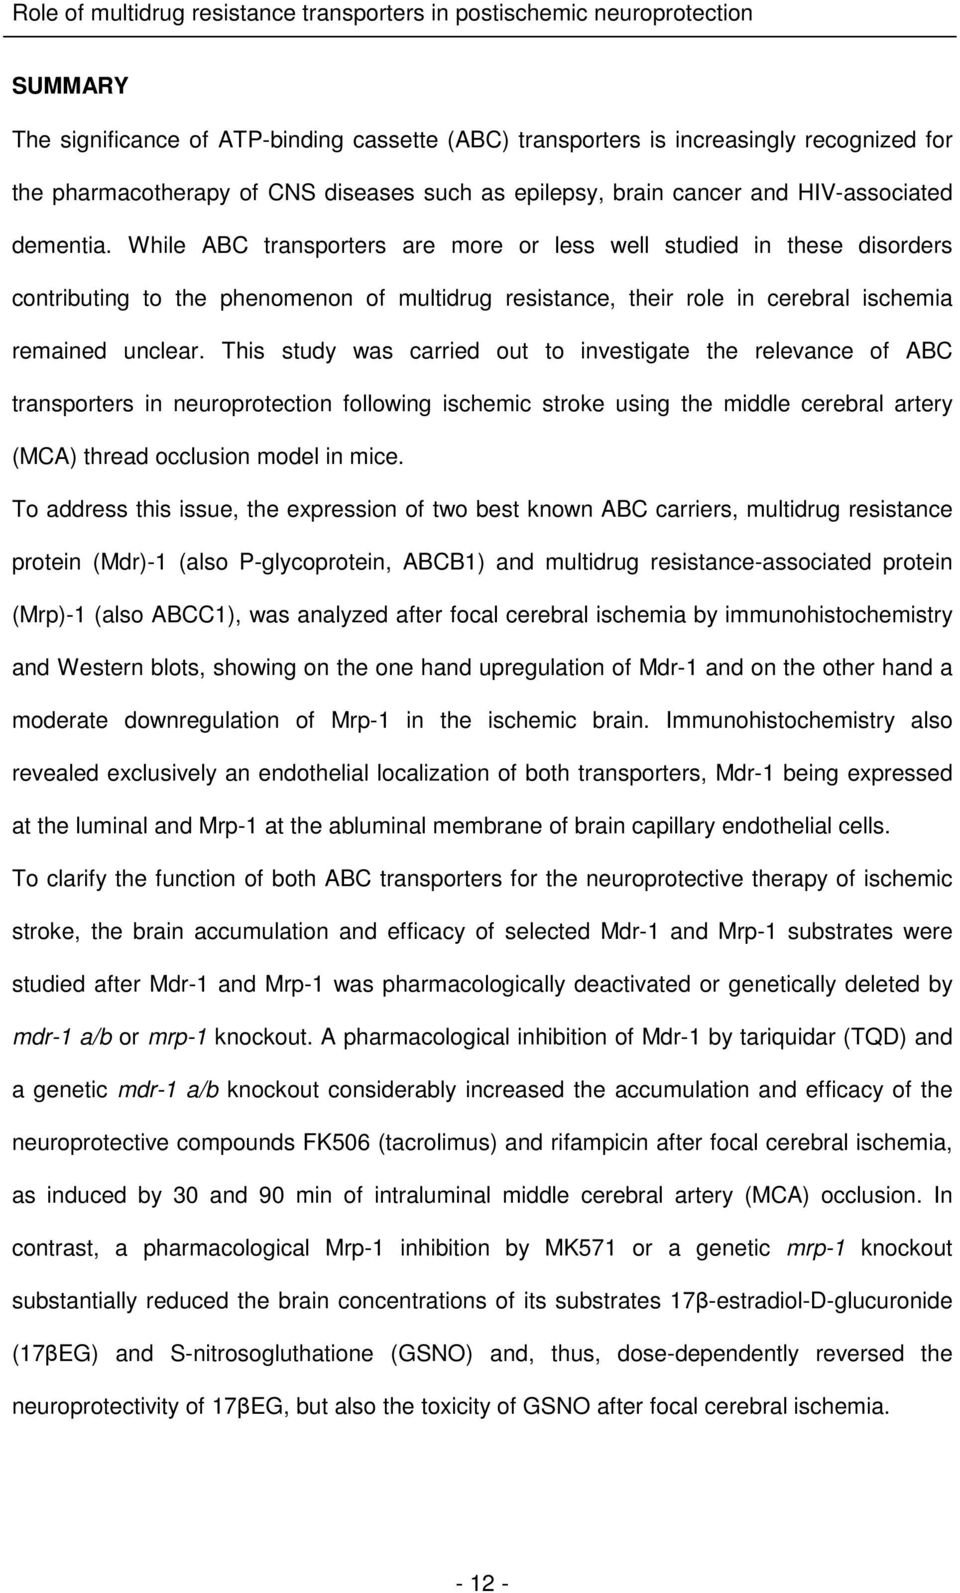 This study was carried out to investigate the relevance of ABC transporters in neuroprotection following ischemic stroke using the middle cerebral artery (MCA) thread occlusion model in mice.